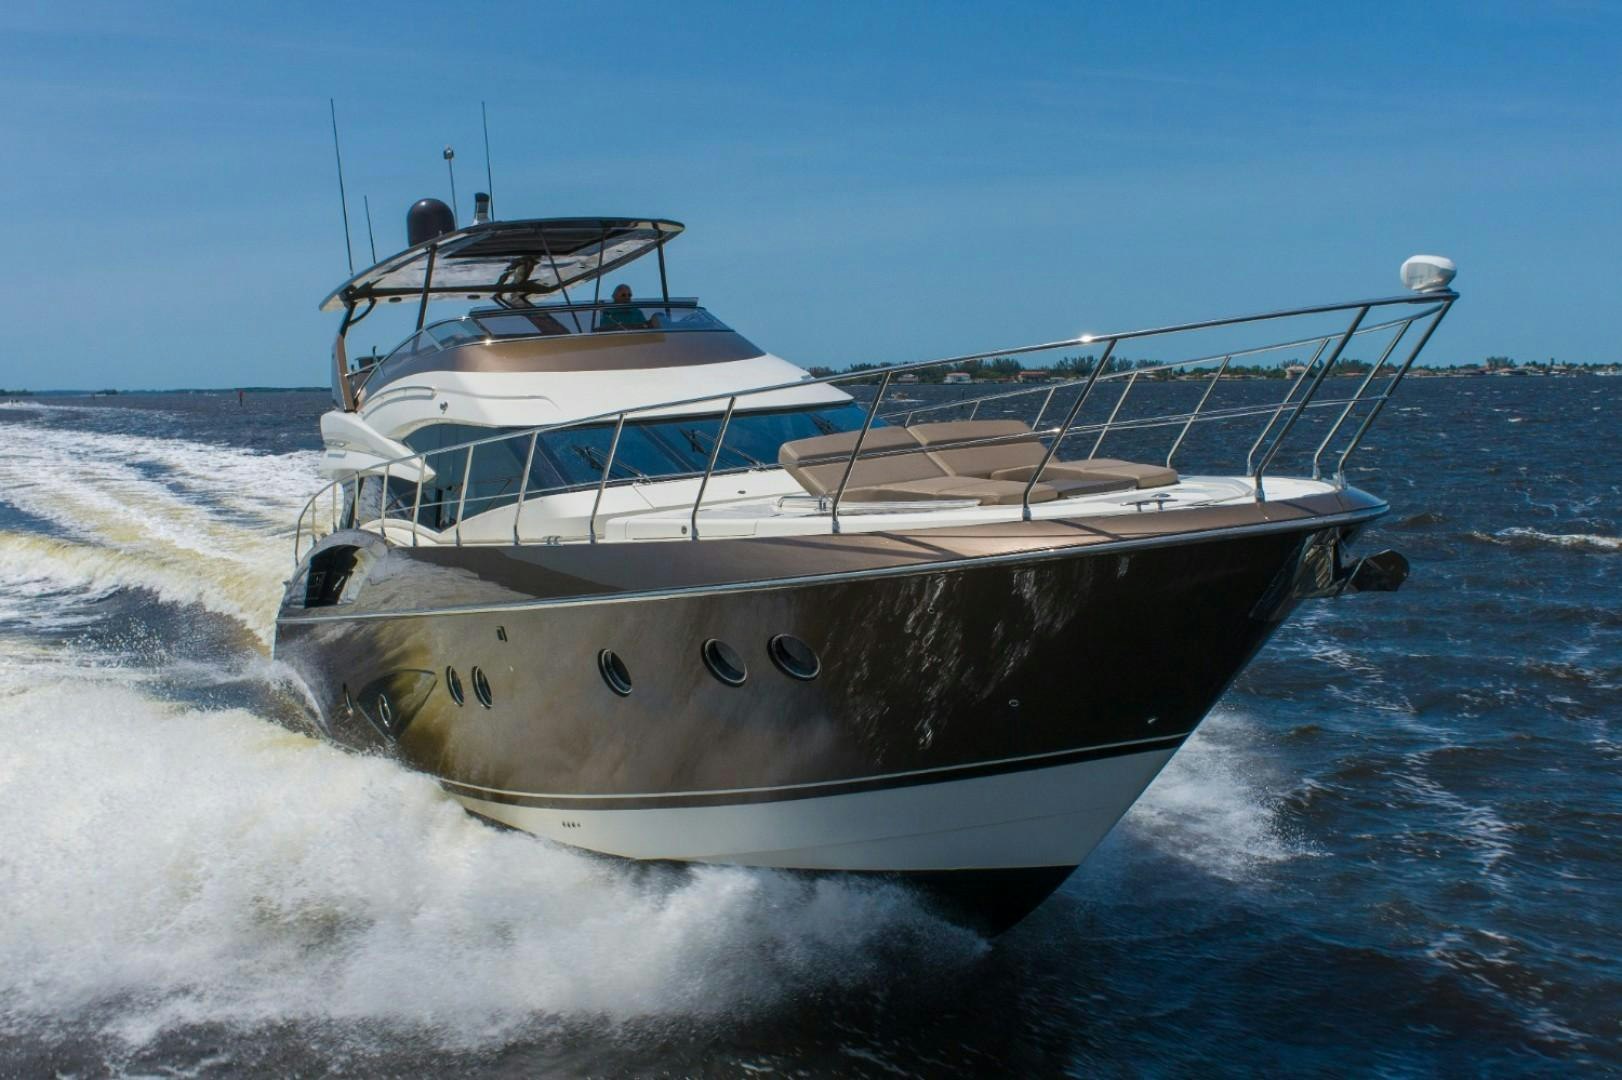 HASSEL FREE II Yacht for Sale in Cape Coral 65 (19.81m) 2013 Marquis NandJ